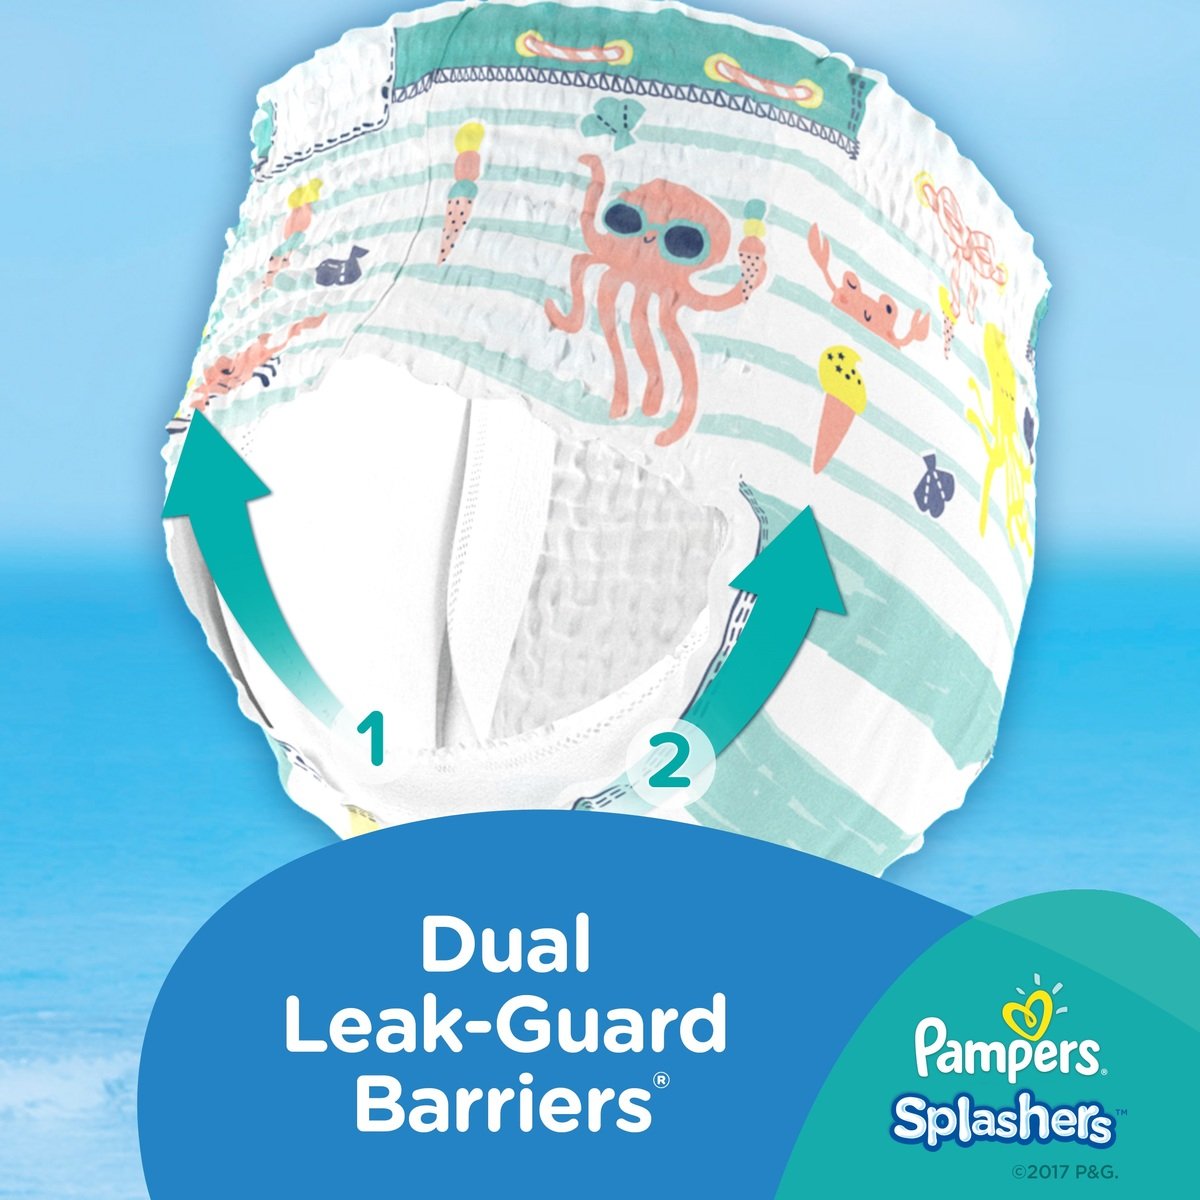 Pampers Splashers Swimming Pants, Size 5-6, >14 kg, 10 Count